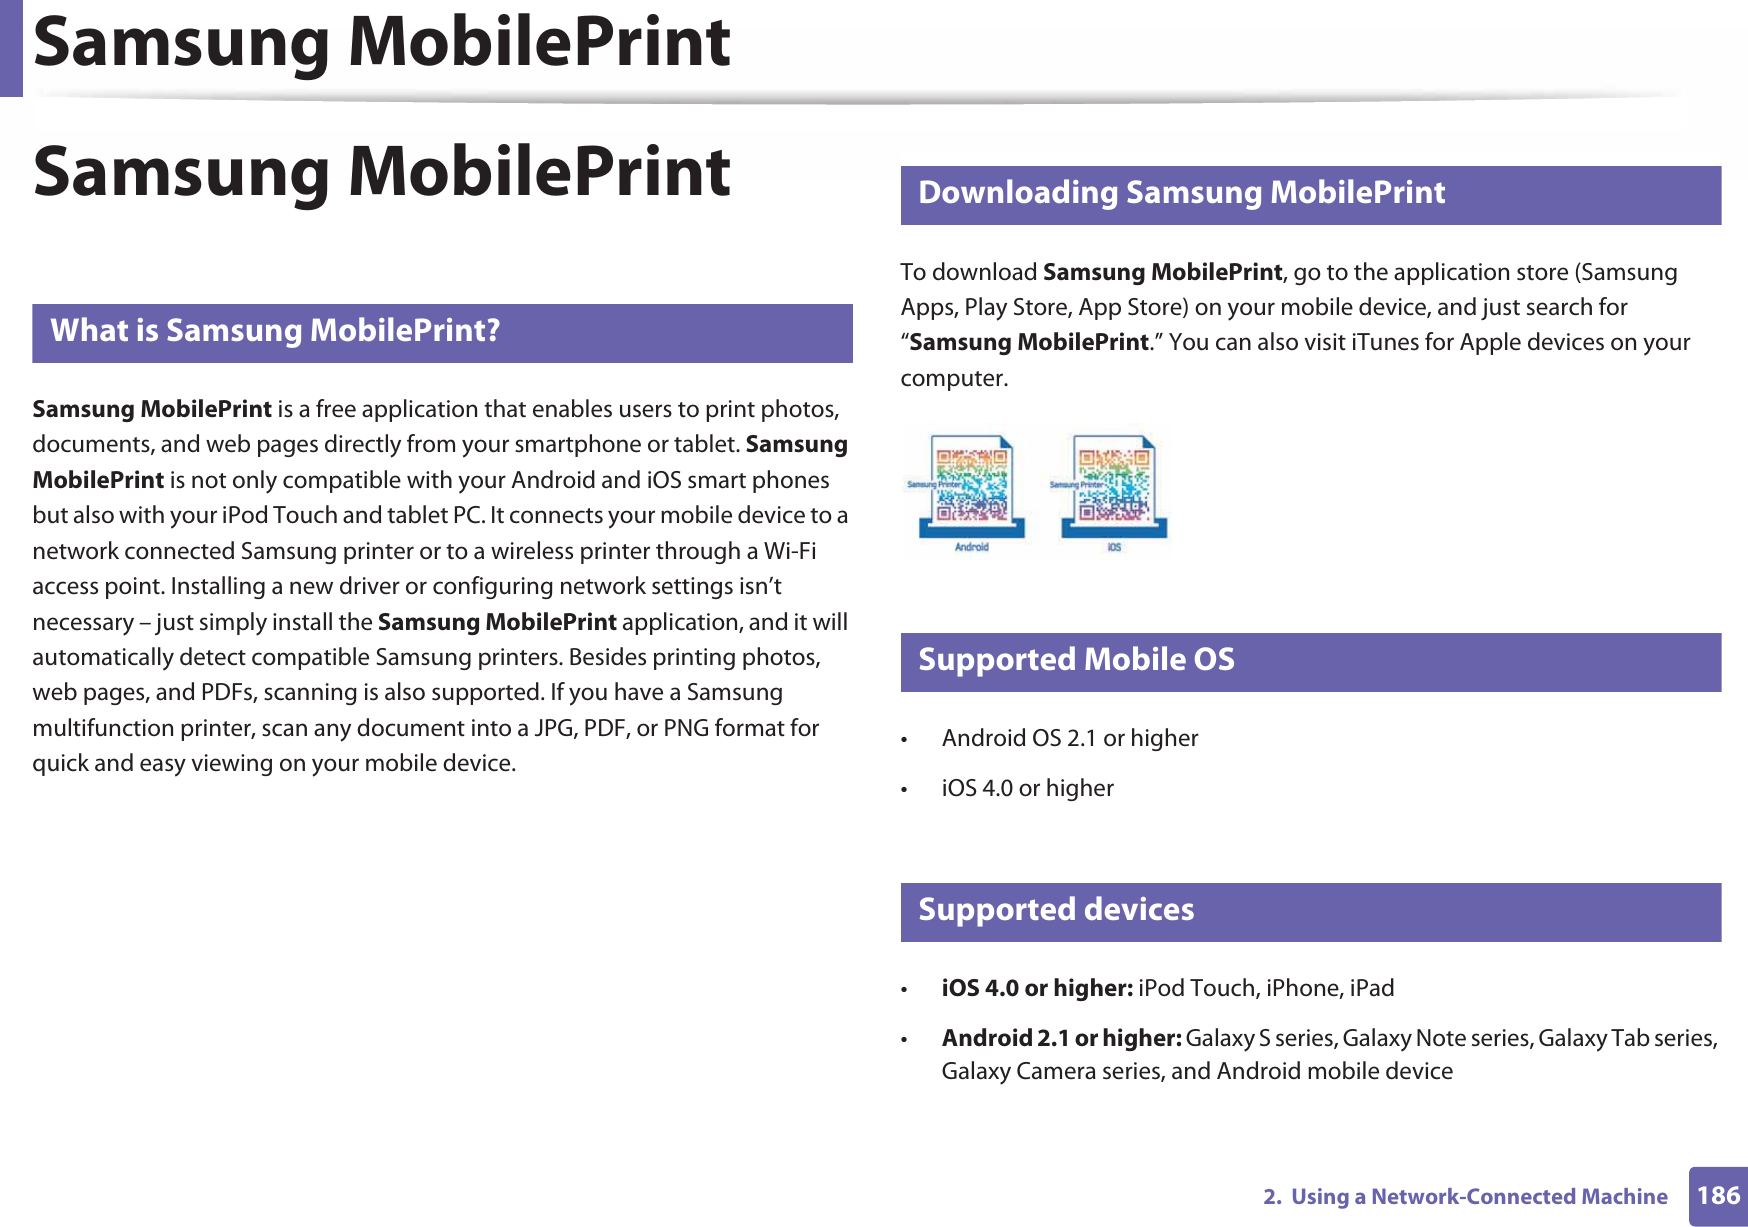 Samsung MobilePrint1862.  Using a Network-Connected MachineSamsung MobilePrint22 What is Samsung MobilePrint?Samsung MobilePrint is a free application that enables users to print photos, documents, and web pages directly from your smartphone or tablet. Samsung MobilePrint is not only compatible with your Android and iOS smart phones but also with your iPod Touch and tablet PC. It connects your mobile device to a network connected Samsung printer or to a wireless printer through a Wi-Fi access point. Installing a new driver or configuring network settings isn’t necessary – just simply install the Samsung MobilePrint application, and it will automatically detect compatible Samsung printers. Besides printing photos, web pages, and PDFs, scanning is also supported. If you have a Samsung multifunction printer, scan any document into a JPG, PDF, or PNG format for quick and easy viewing on your mobile device. 23 Downloading Samsung MobilePrintTo download Samsung MobilePrint, go to the application store (Samsung Apps, Play Store, App Store) on your mobile device, and just search for “Samsung MobilePrint.” You can also visit iTunes for Apple devices on your computer.24 Supported Mobile OS • Android OS 2.1 or higher • iOS 4.0 or higher25 Supported devices•iOS 4.0 or higher: iPod Touch, iPhone, iPad•Android 2.1 or higher: Galaxy S series, Galaxy Note series, Galaxy Tab series, Galaxy Camera series, and Android mobile device